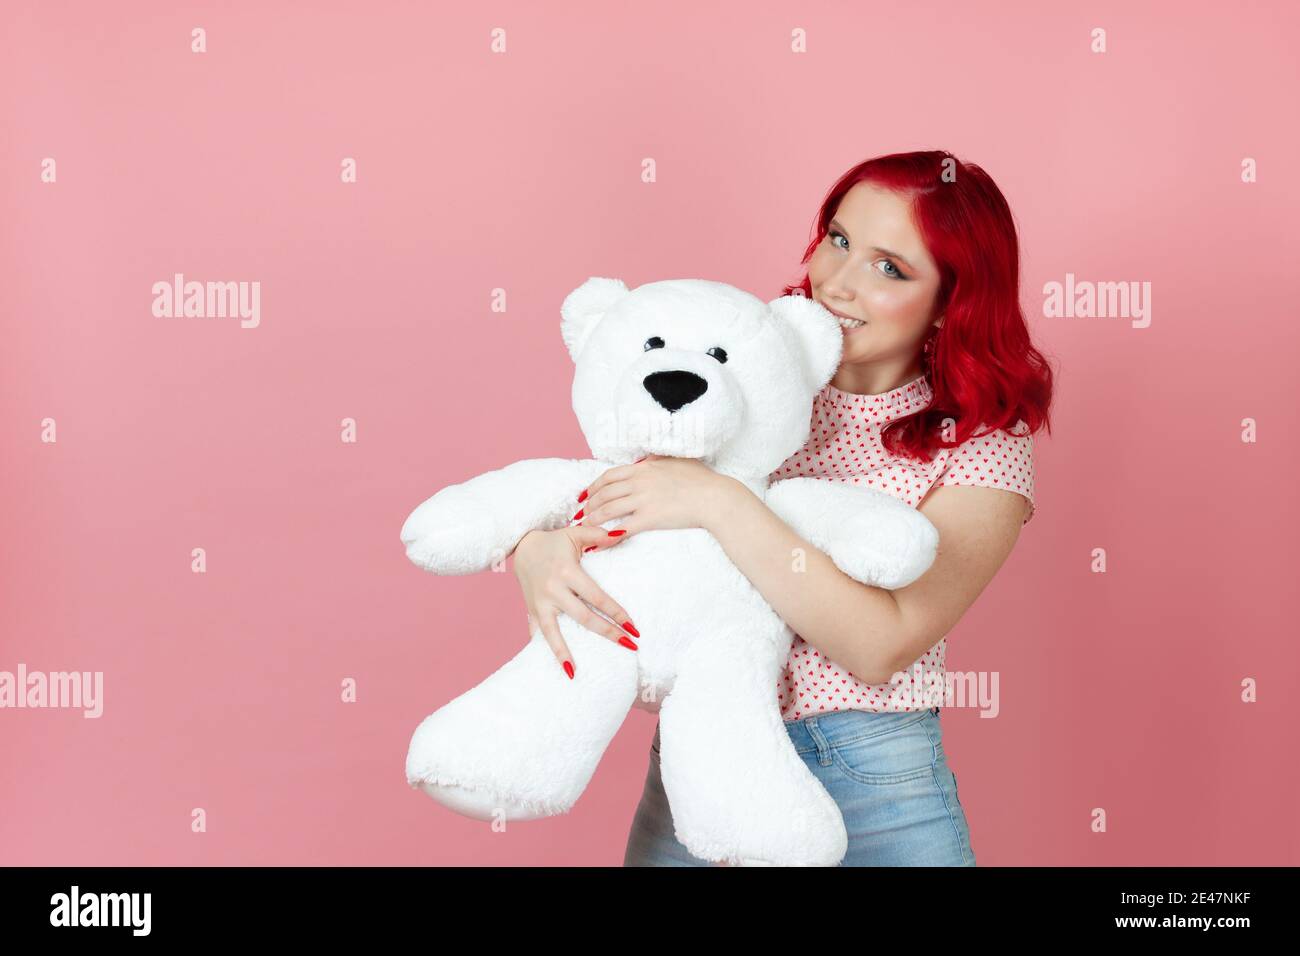 Close-up naughty, playful woman with red hair bites the ear of a large white teddy bear isolated on a pink background Stock Photo